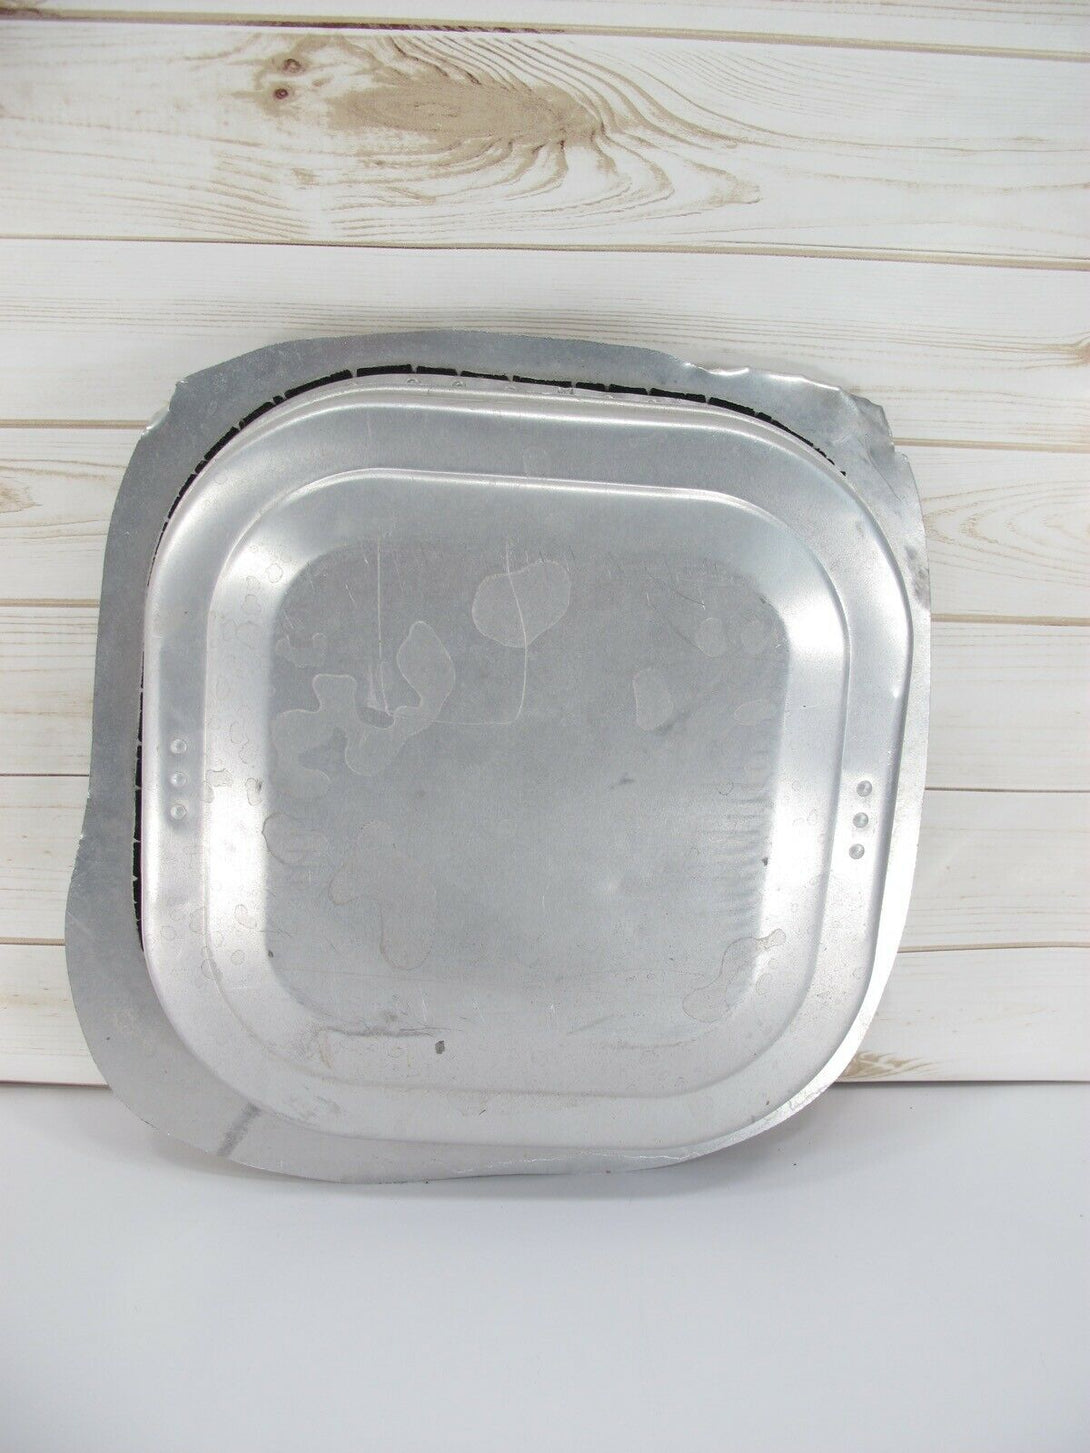 Rooftop Air Vent Fan Cap Cover from Vintage Airstream Trailer 1970-80s - Zeereez